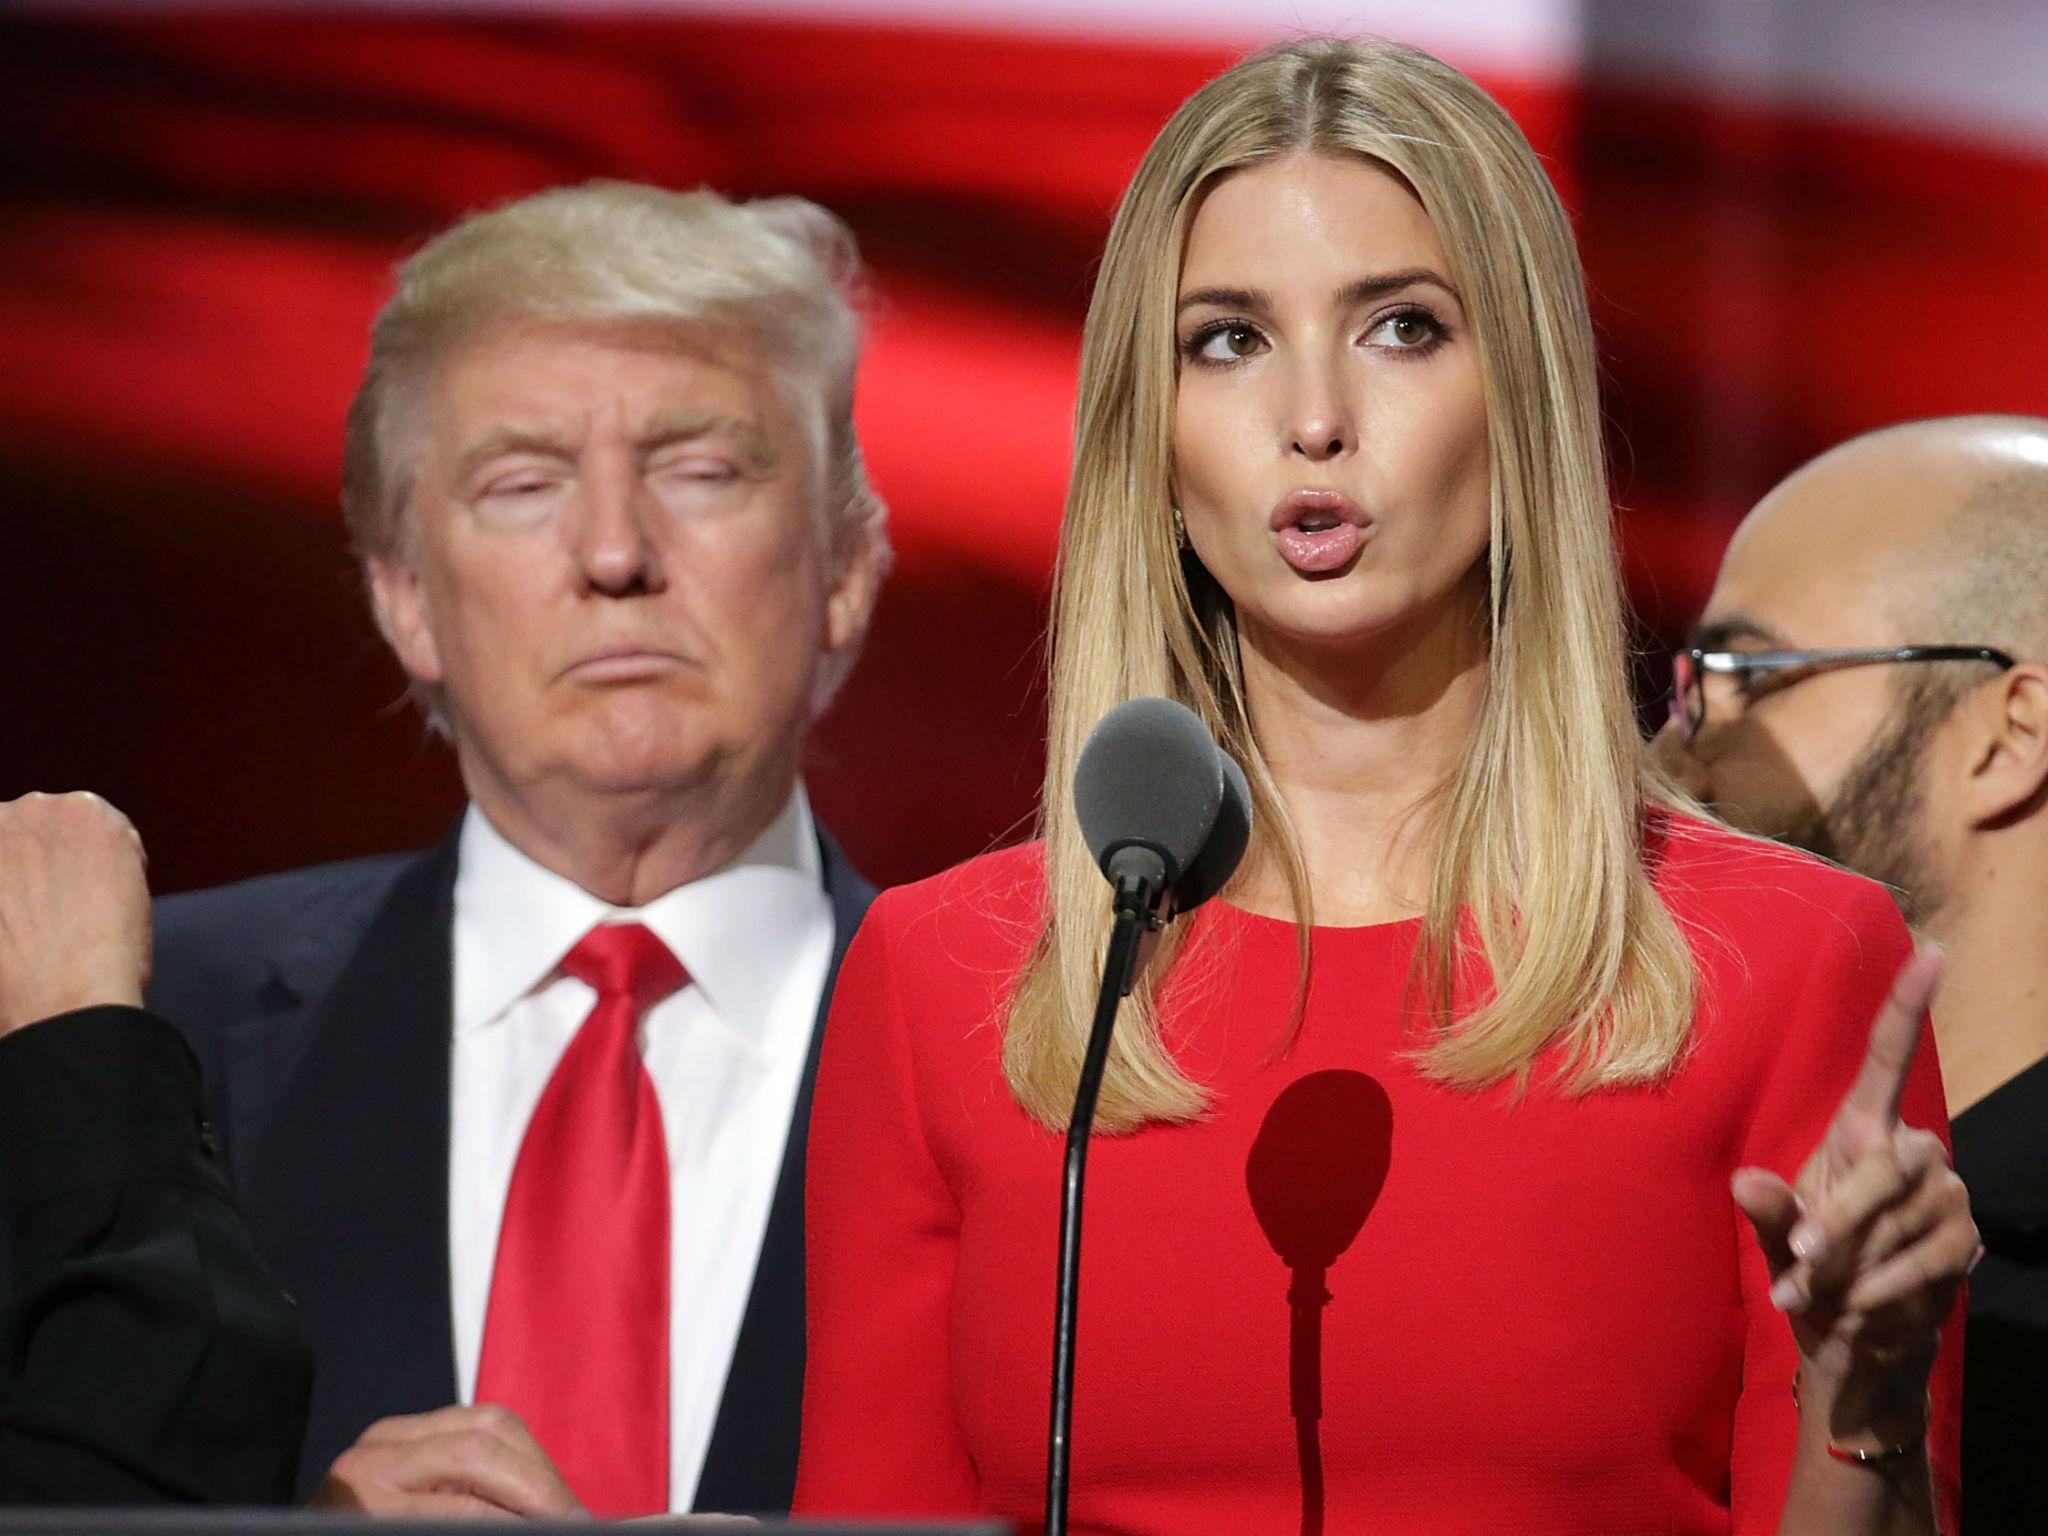 The co-founders said they did not agree with Ivanka's father's campaign